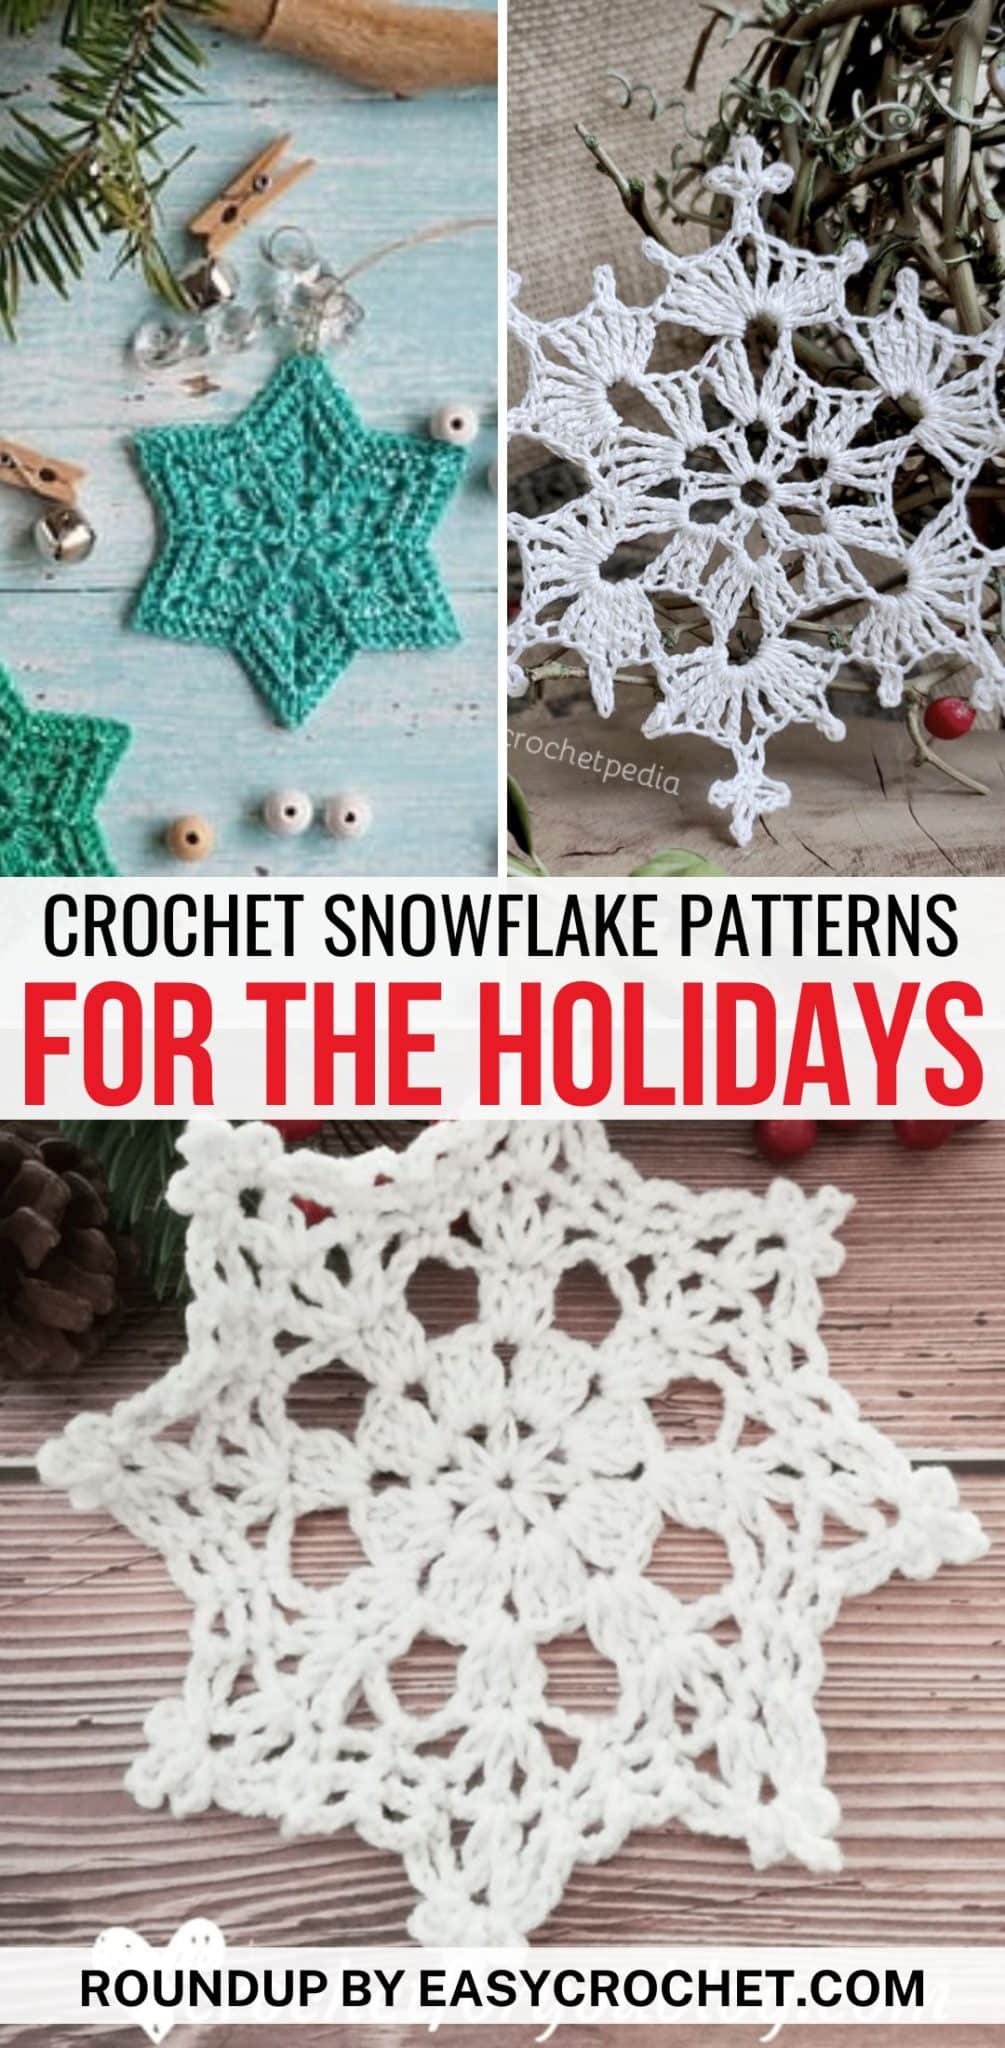 crochet snowflake patterns that are all free patterns